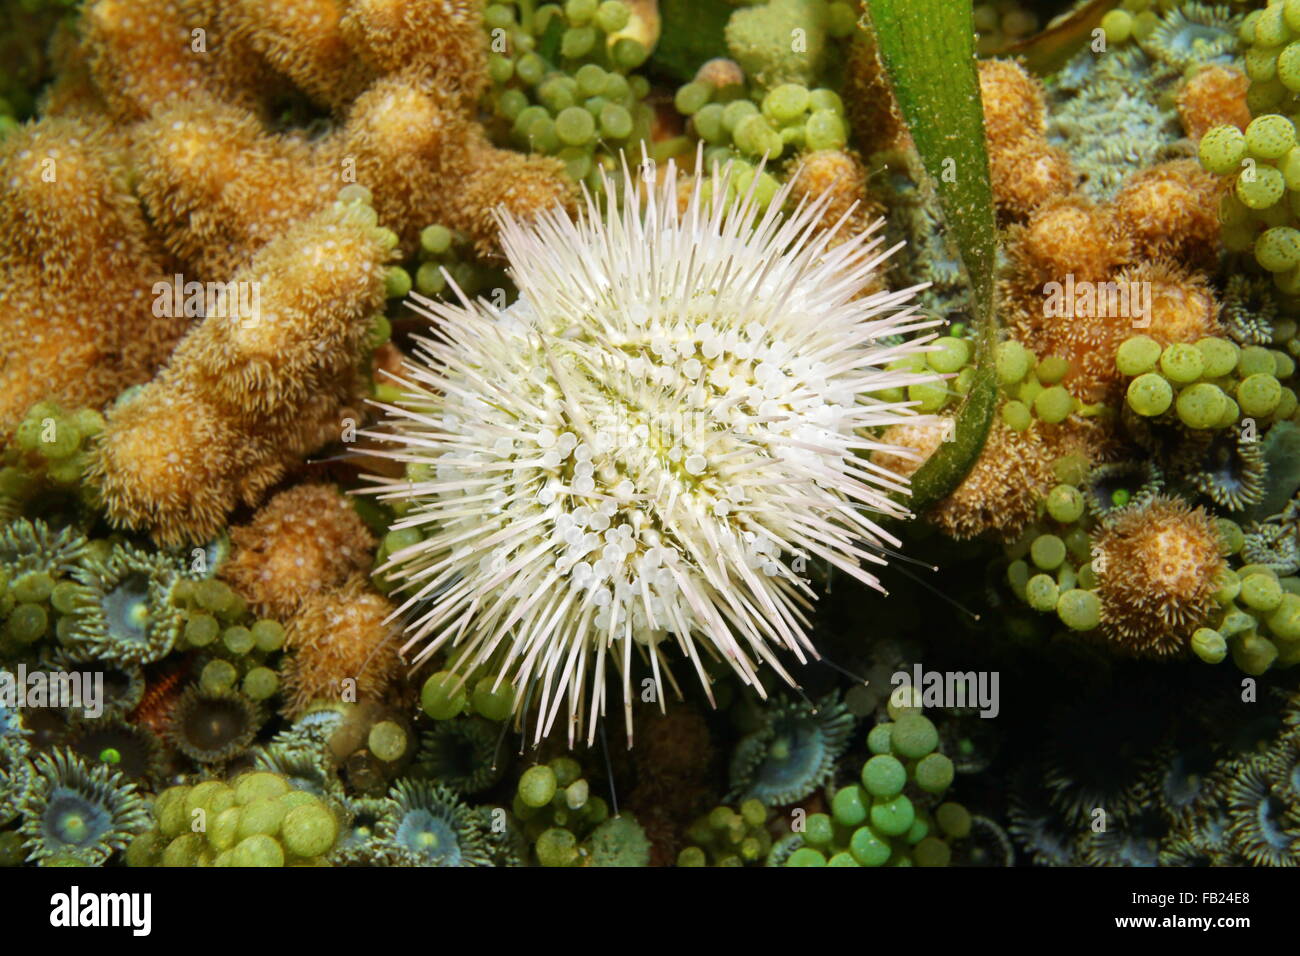 A variegated sea urchin or green sea urchin, Lytechinus variegatus, on the seabed in the Caribbean sea, Panama, Central America Stock Photo